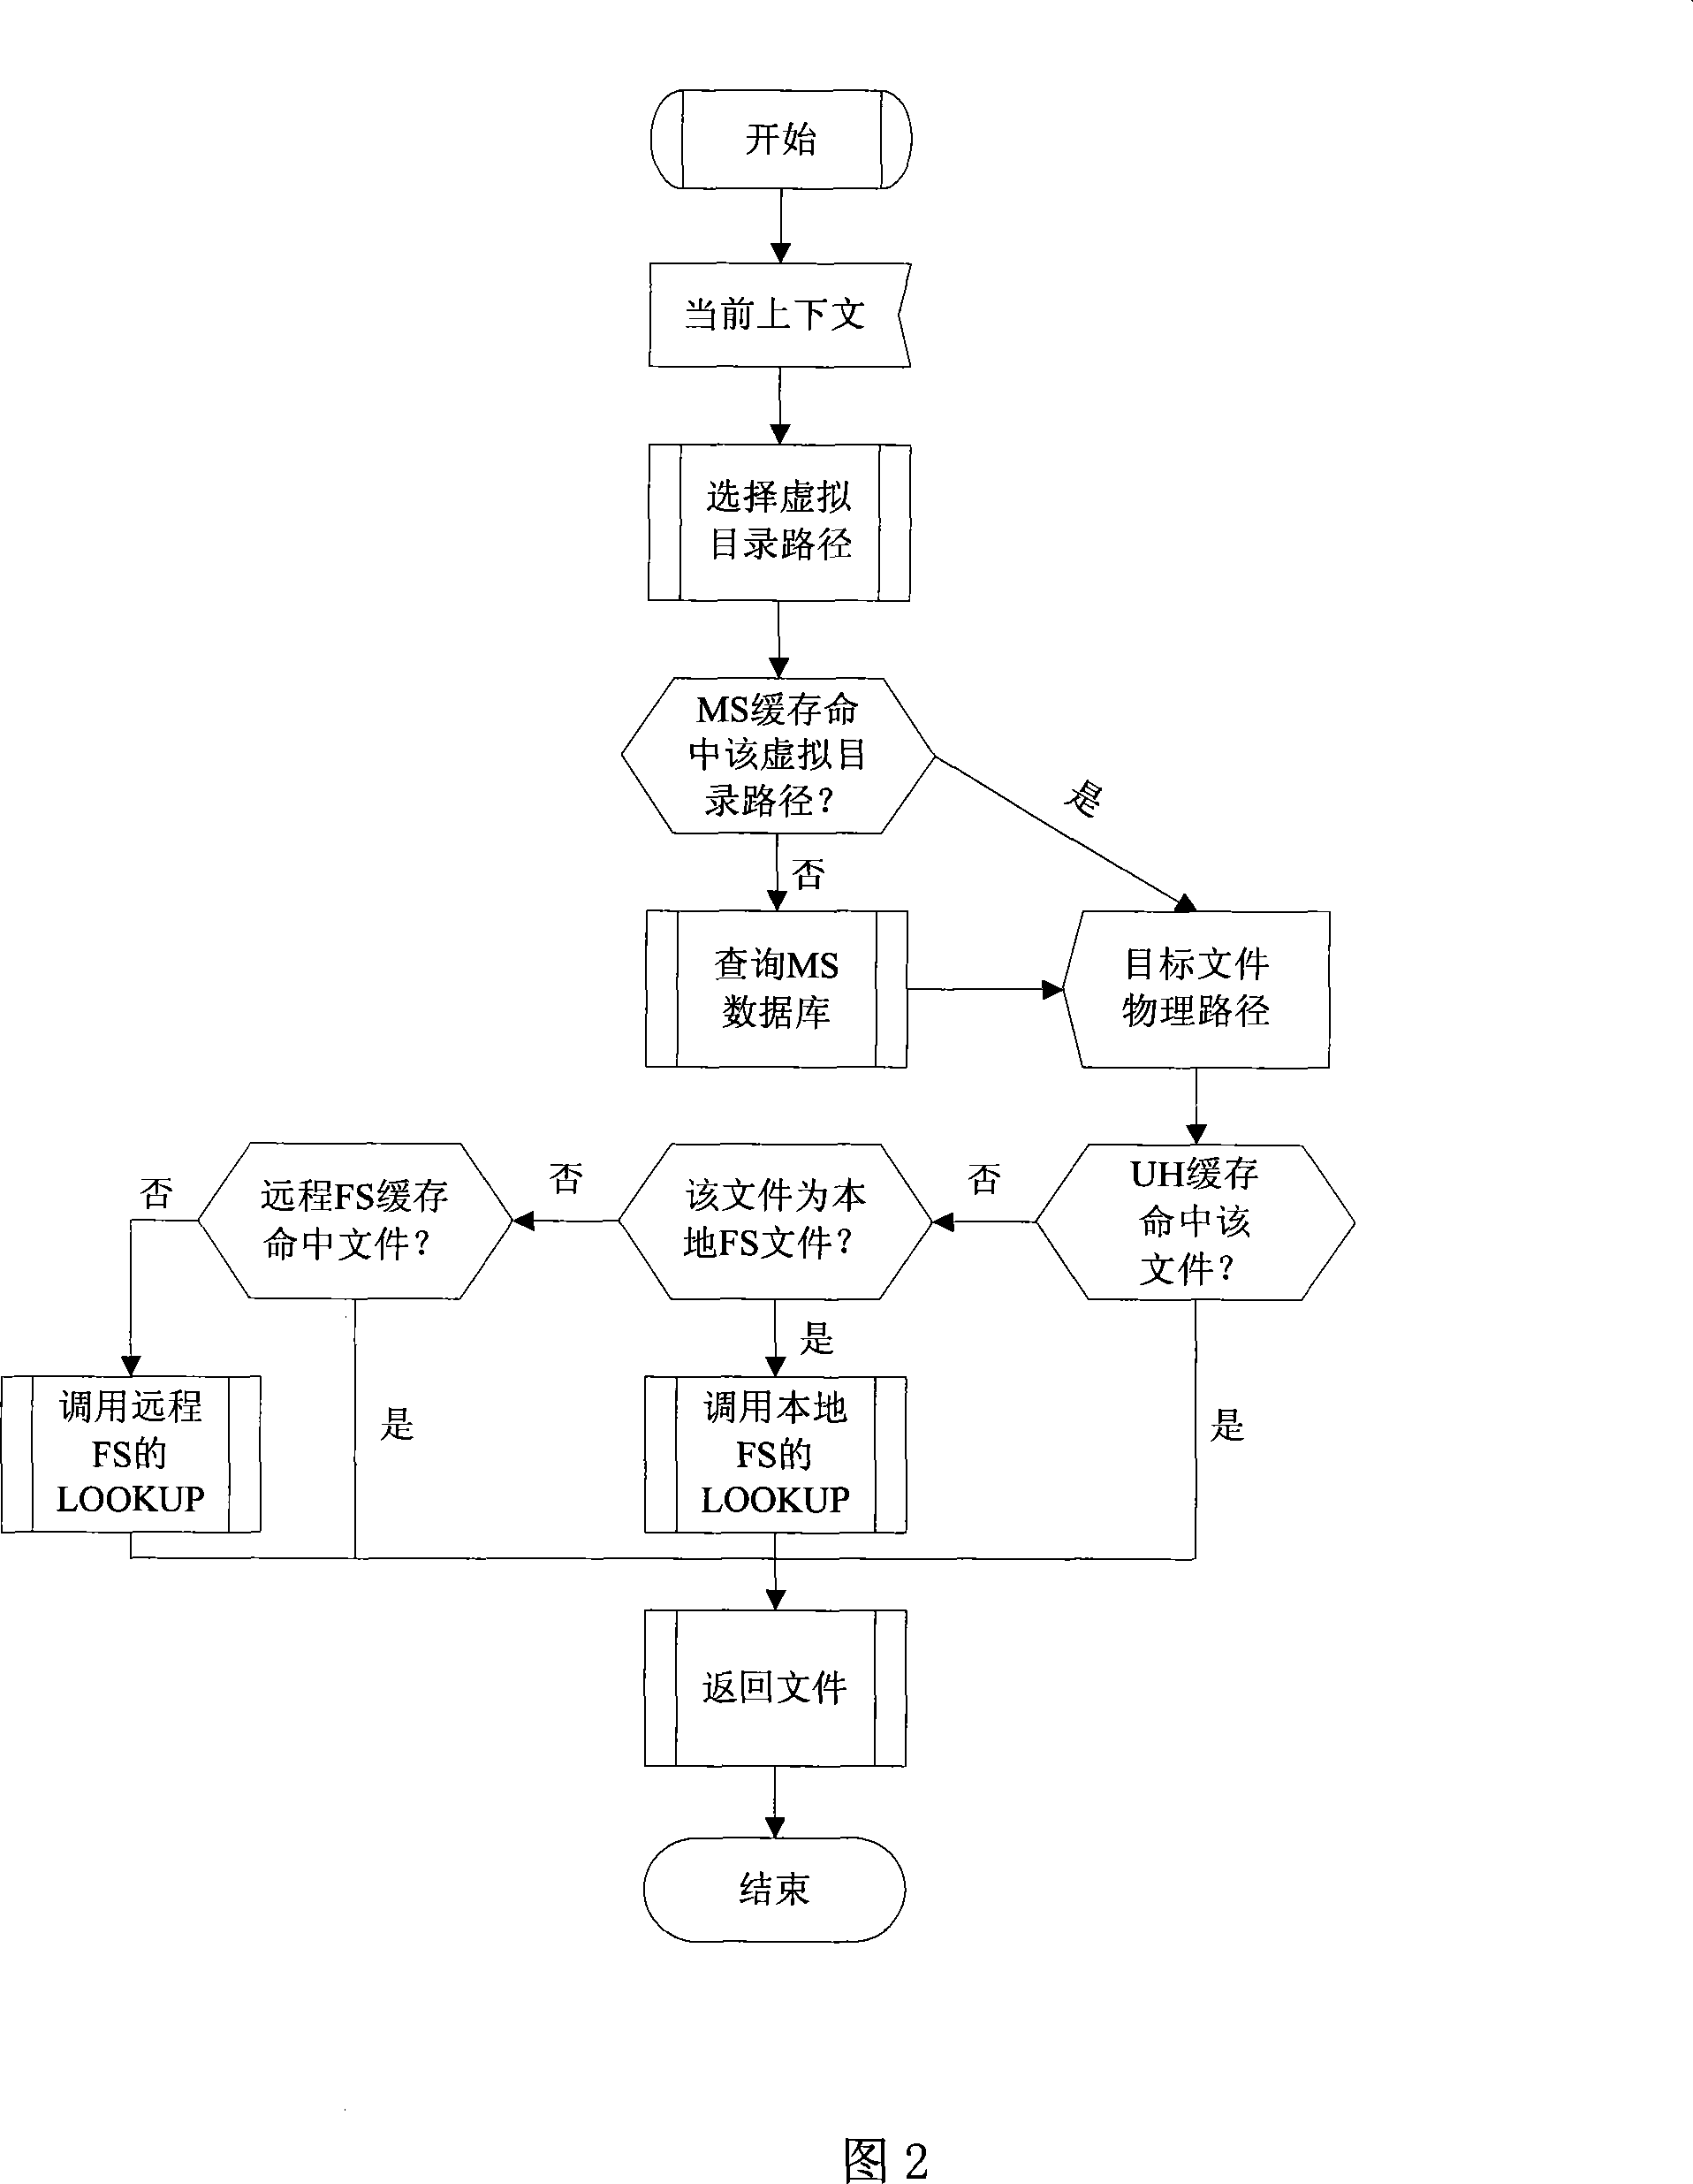 Highly effective dynamic path analysis method based on ContextFS